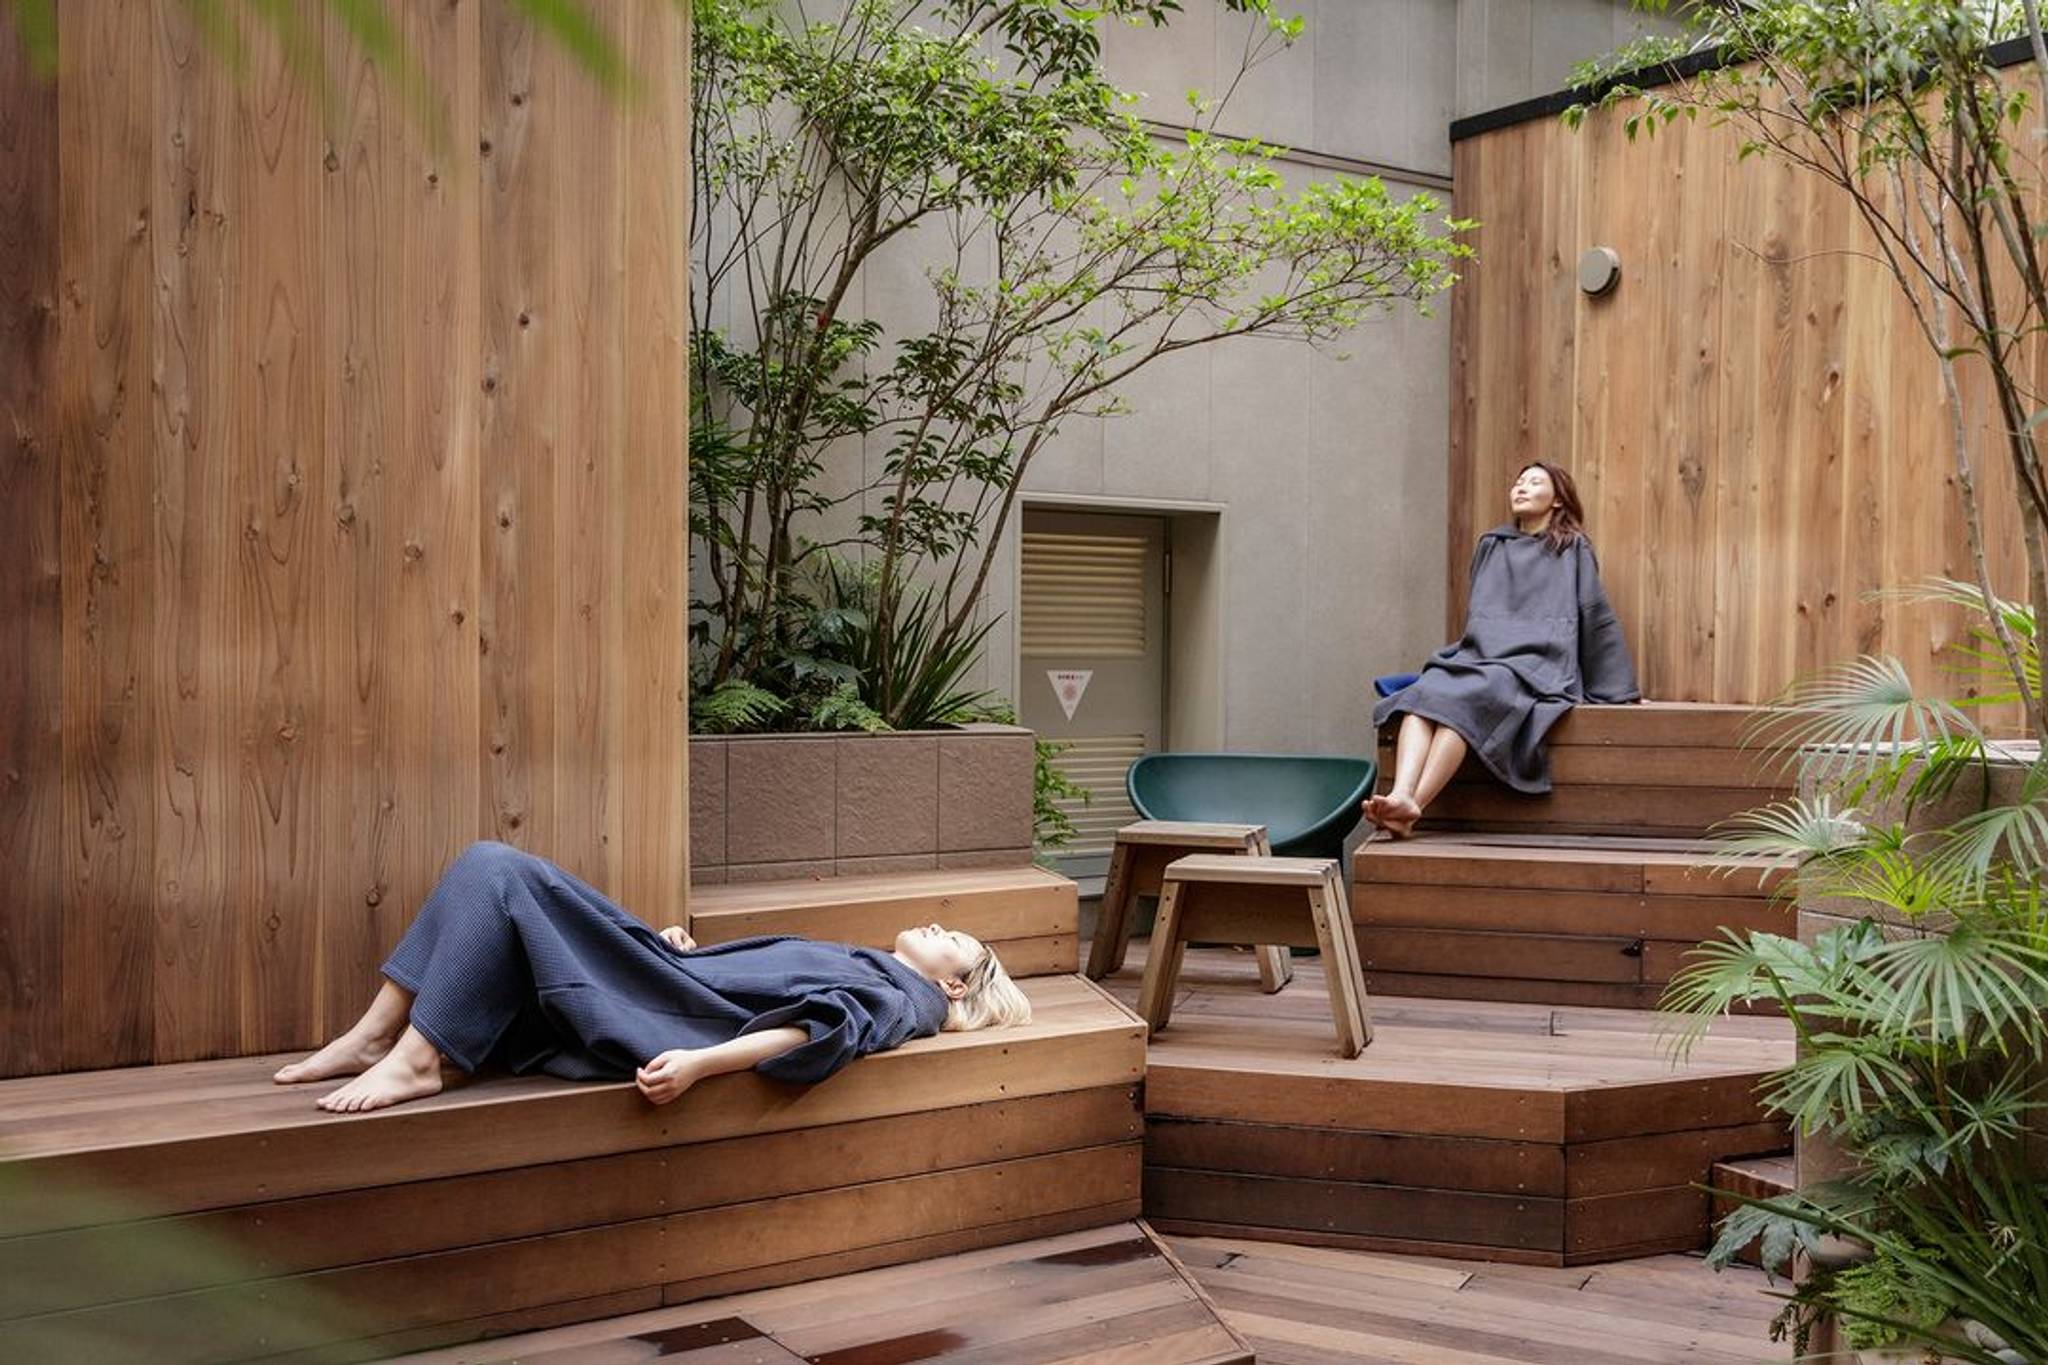 How sauna culture is shaping the Japanese wellness economy